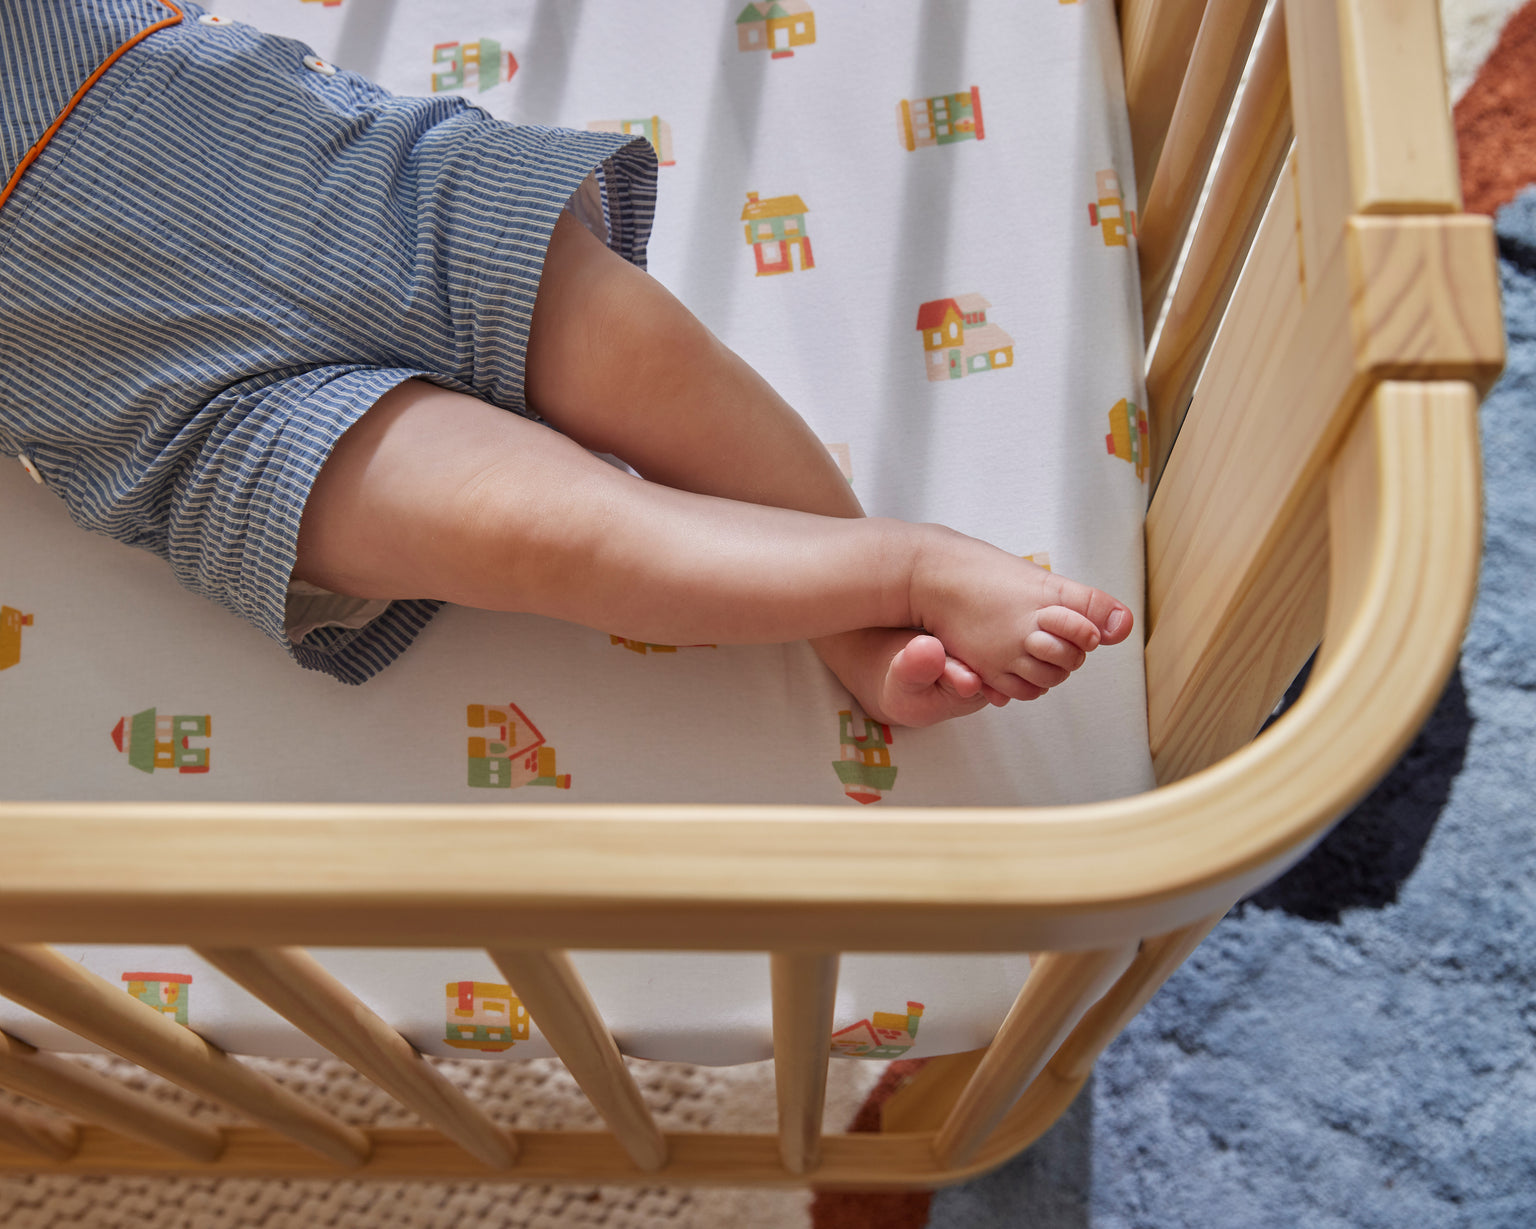 Crib Safety and Your Child's Development